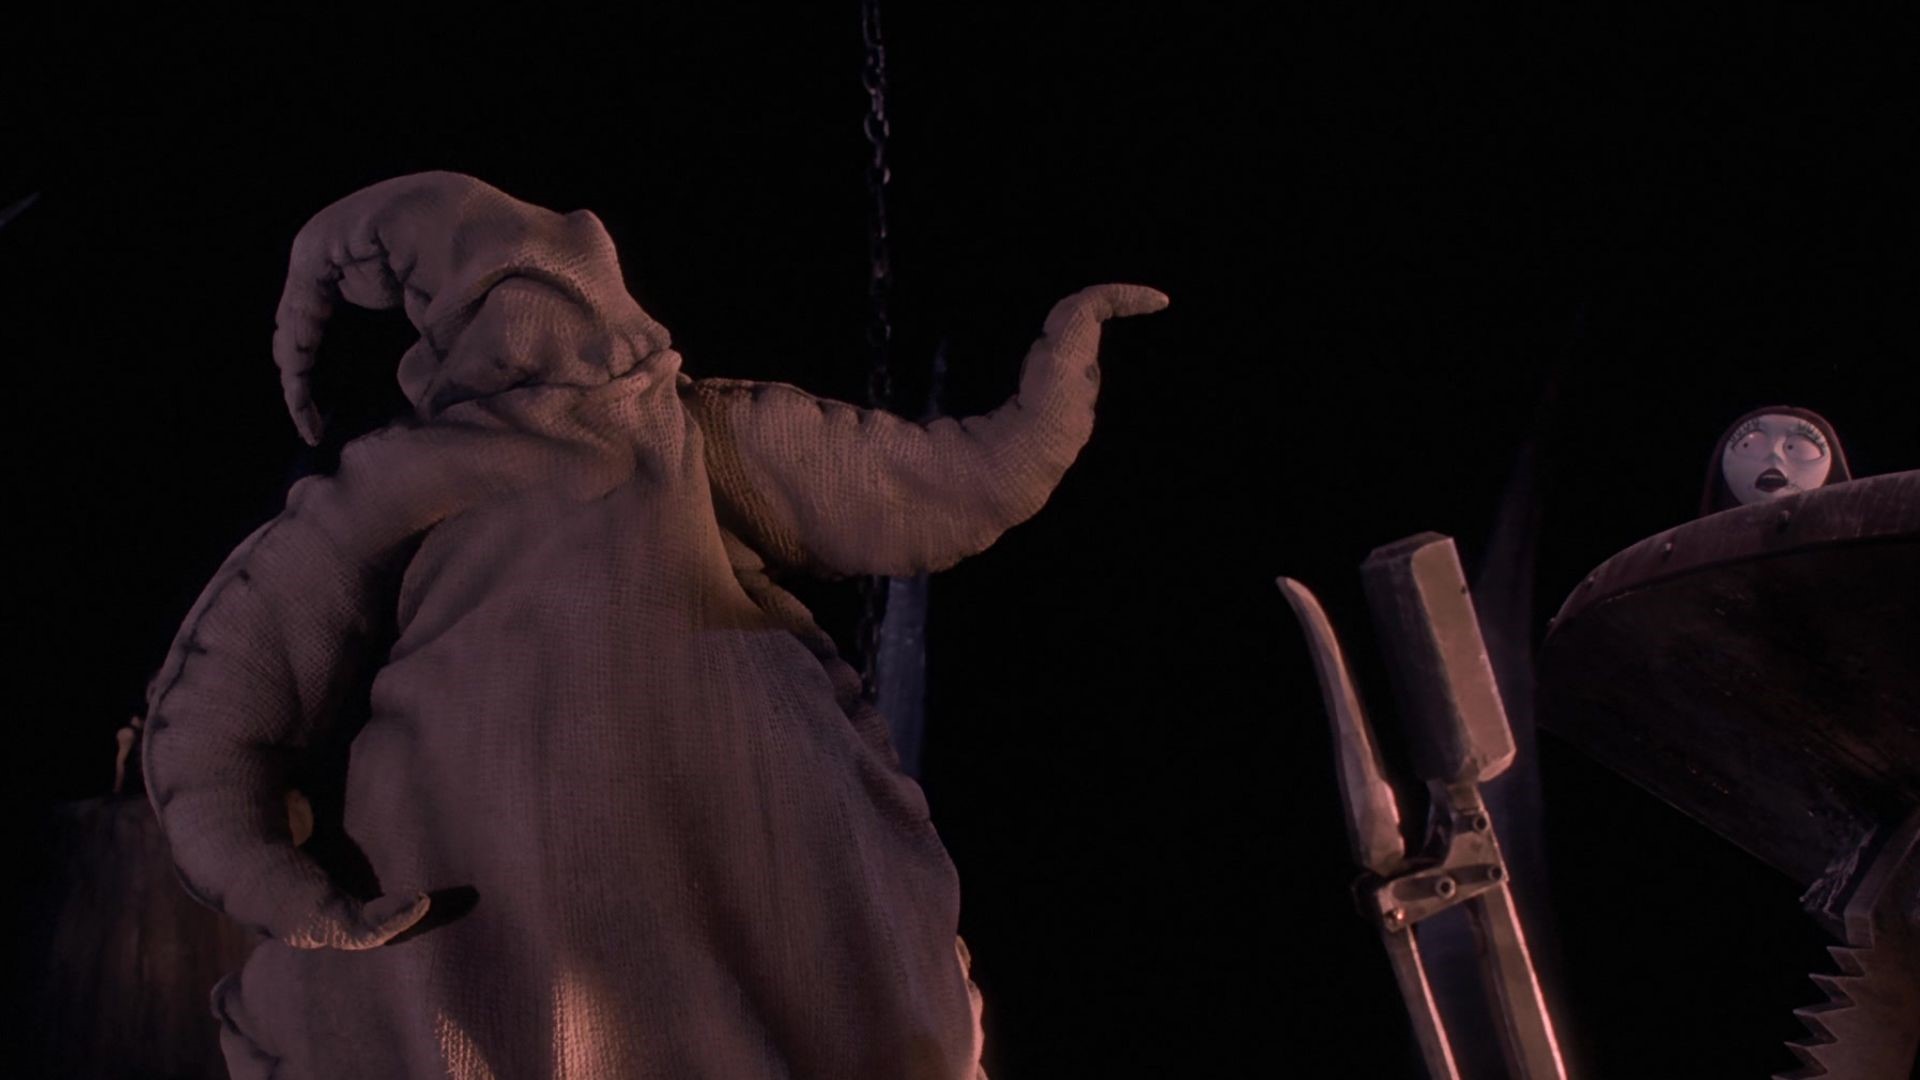 19 Facts About Oogie Boogie (The Nightmare Before Christmas